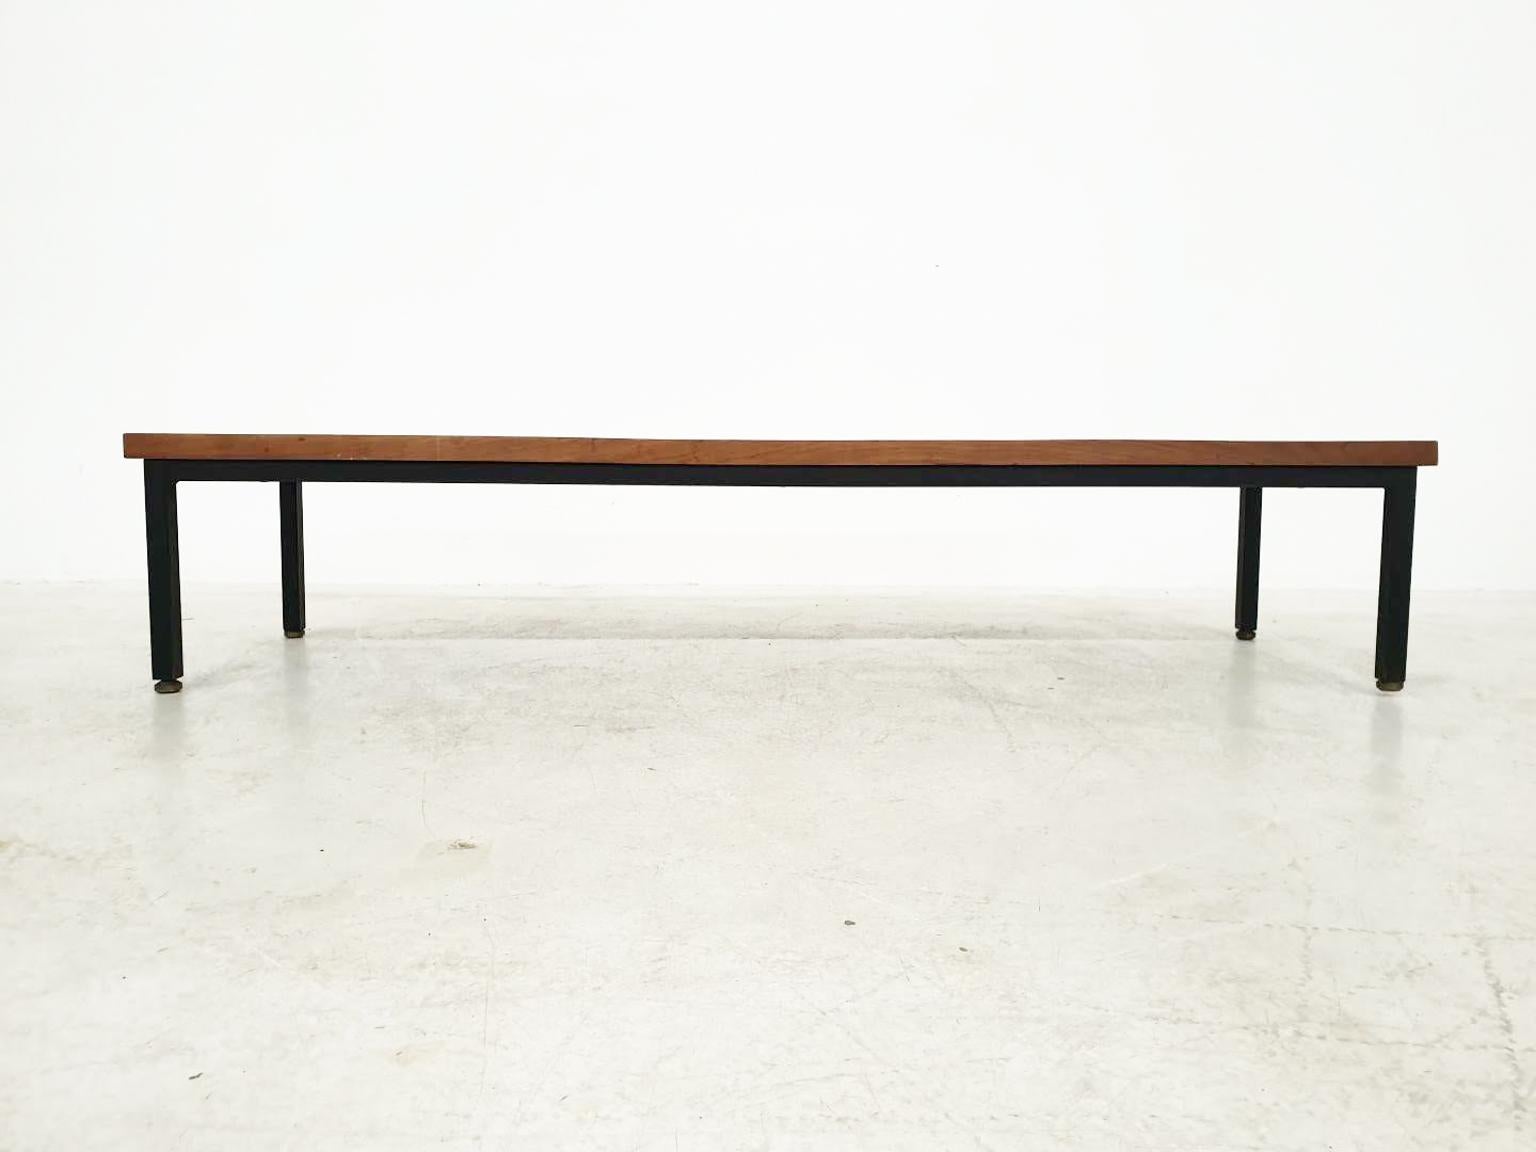 Wood and metal slat bench by Fratelli Saporiti, made and designed in Italy in the 1950s. 

Rare slat bench by high end midcentury furniture producer Saporiti. The bench is made of seven wooden slats on a black metal frame. The height can be adjusted